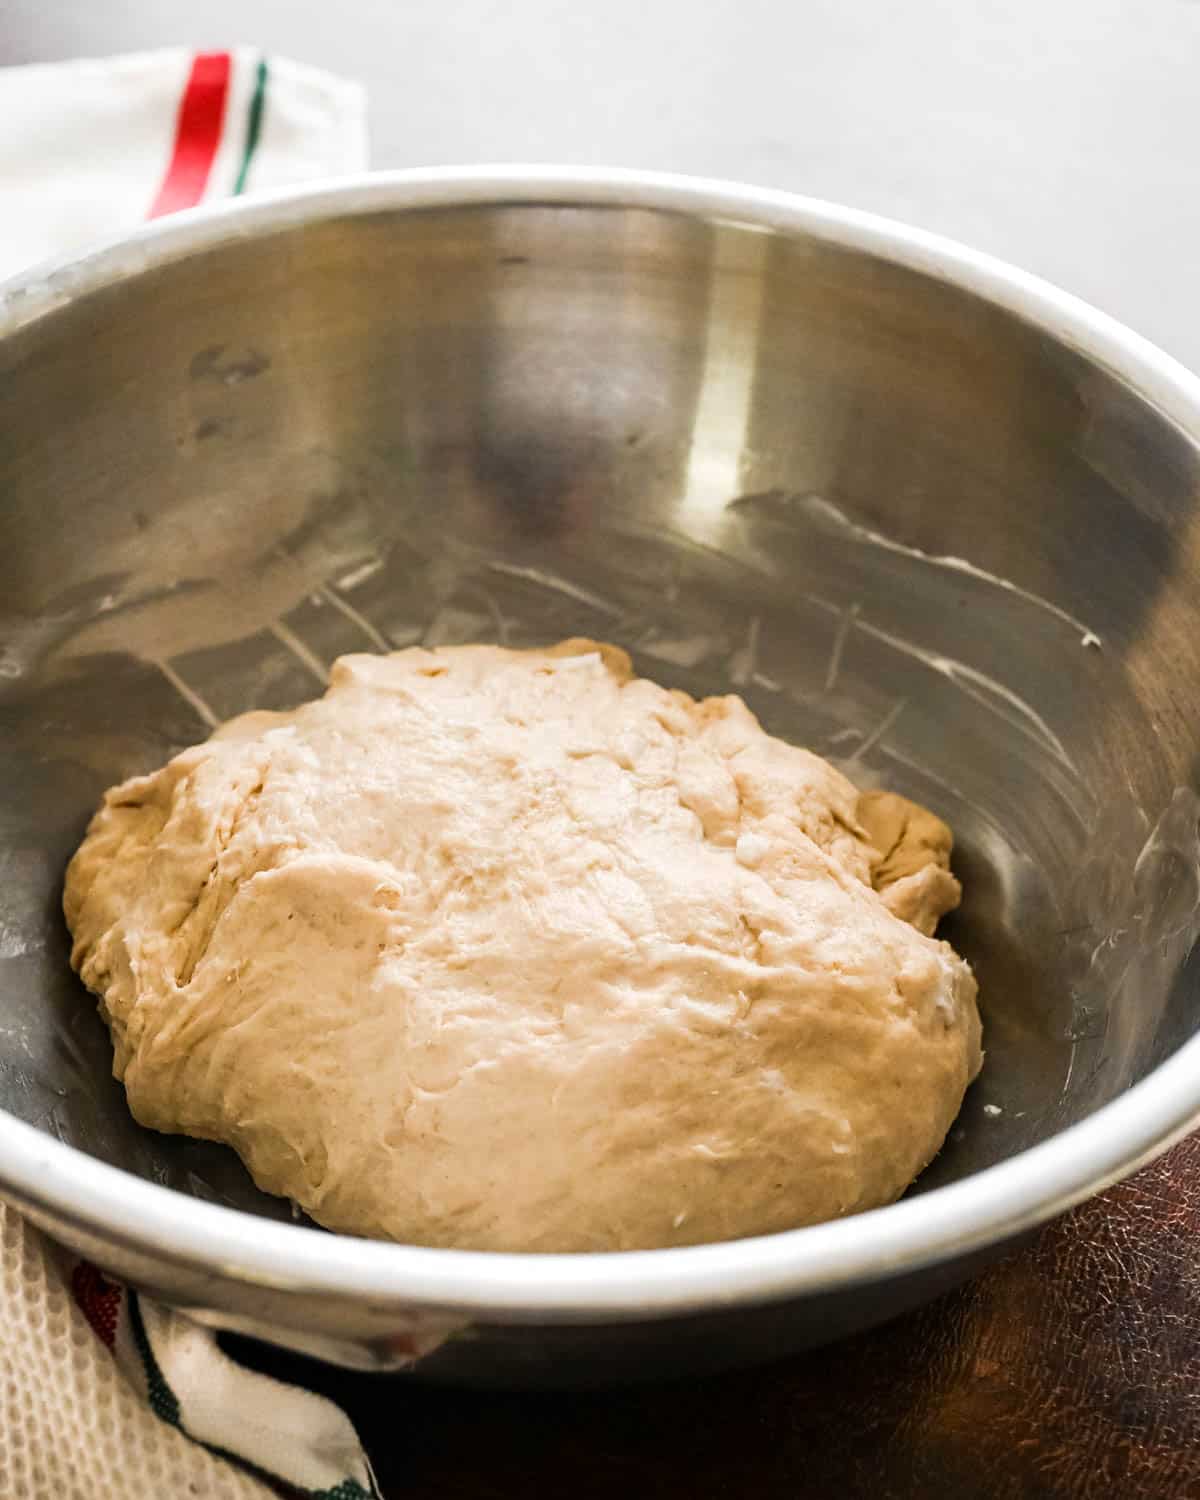 I place the ball of dough in a greased bowl to rise overnight.